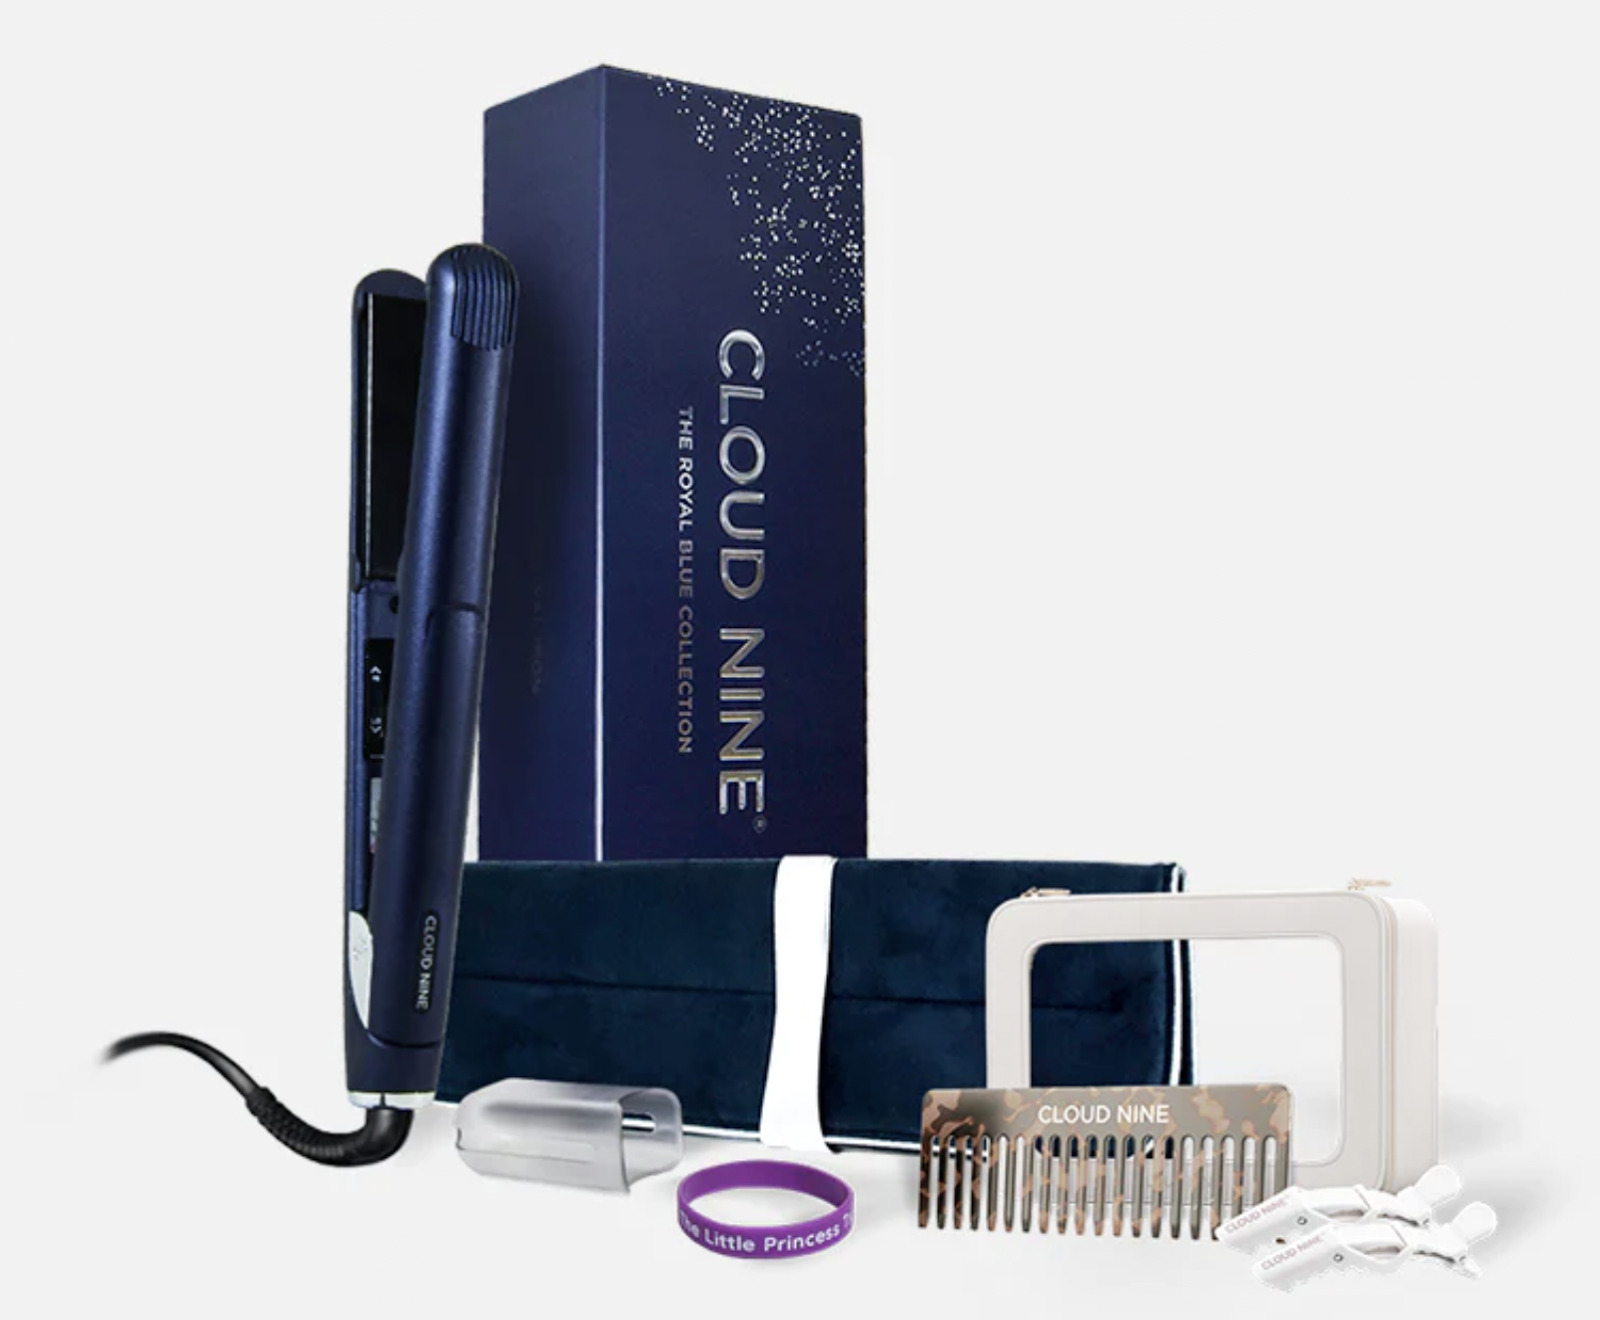 Hair tool retailer CLOUD NINE partners with The Little Princess Trust for charity initiative